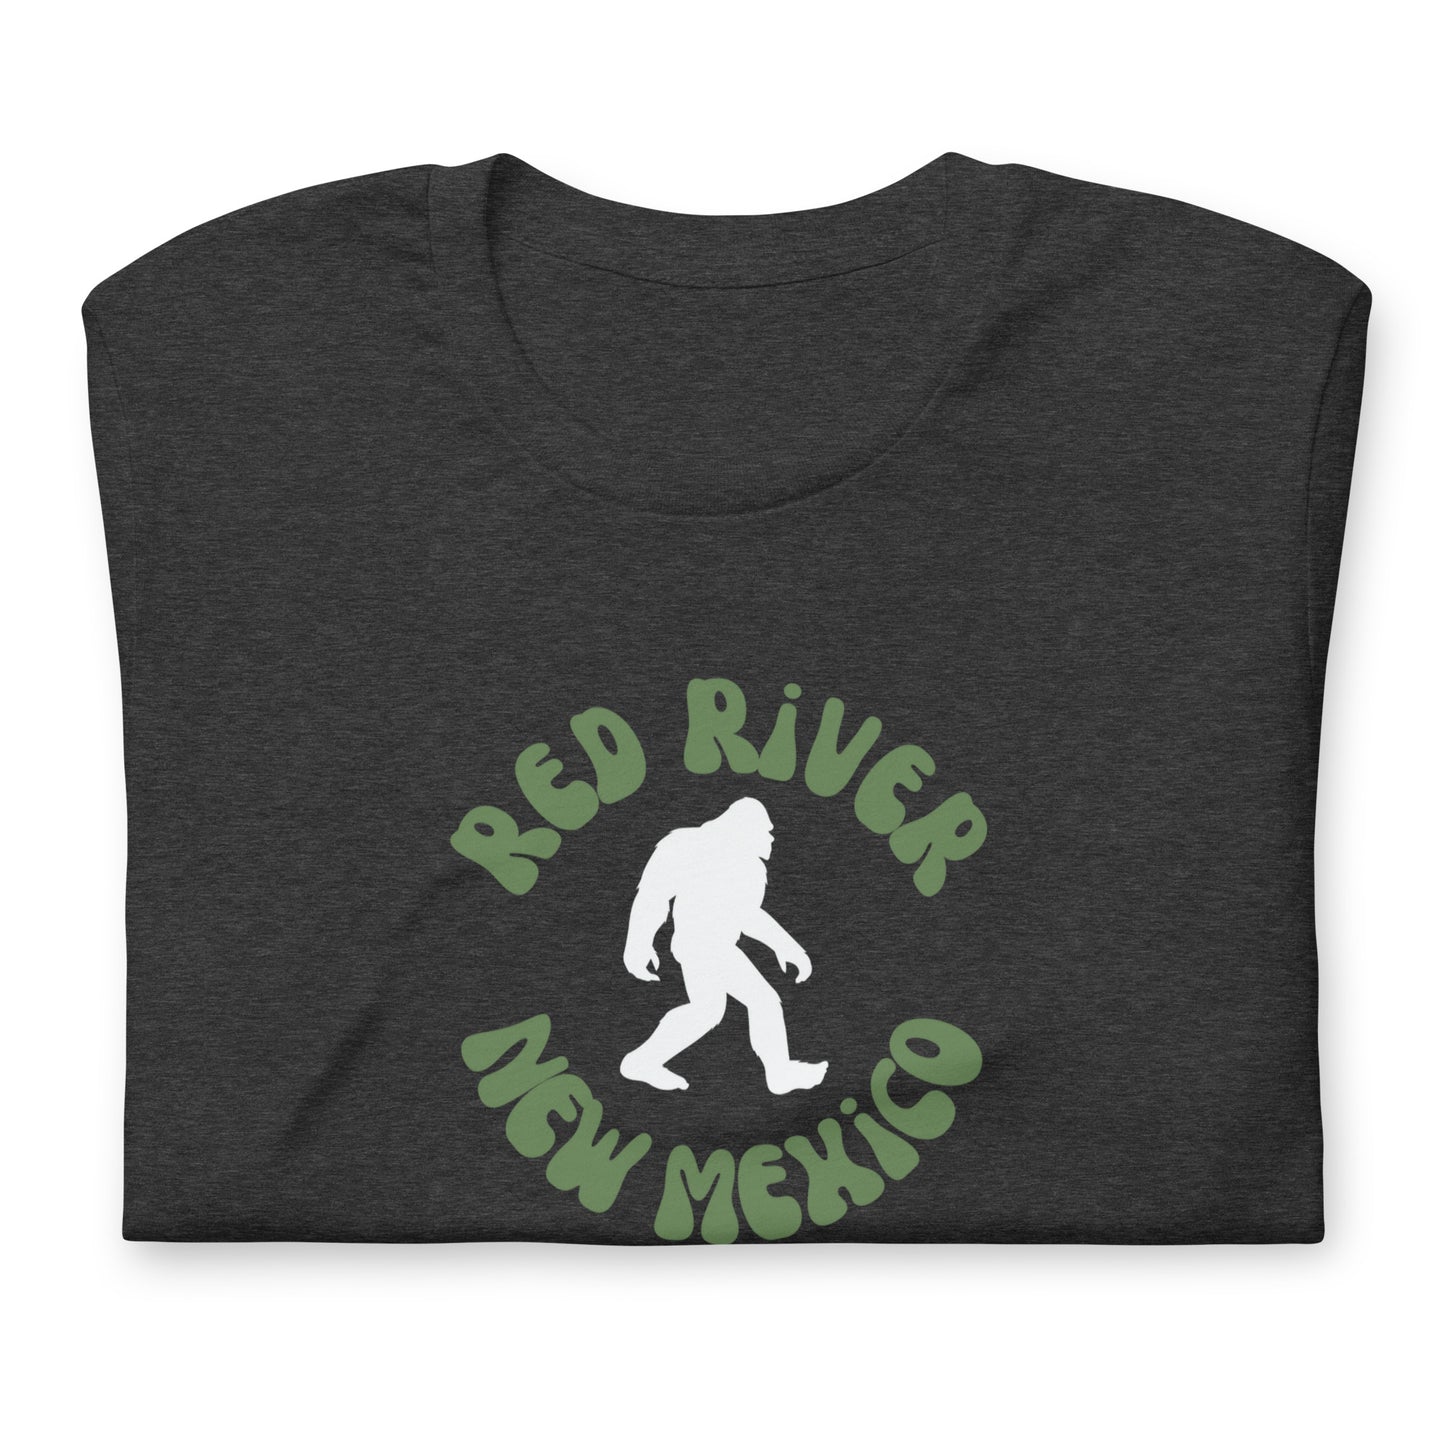 The Red River, New Mexico Yeti Unisex T-shirt